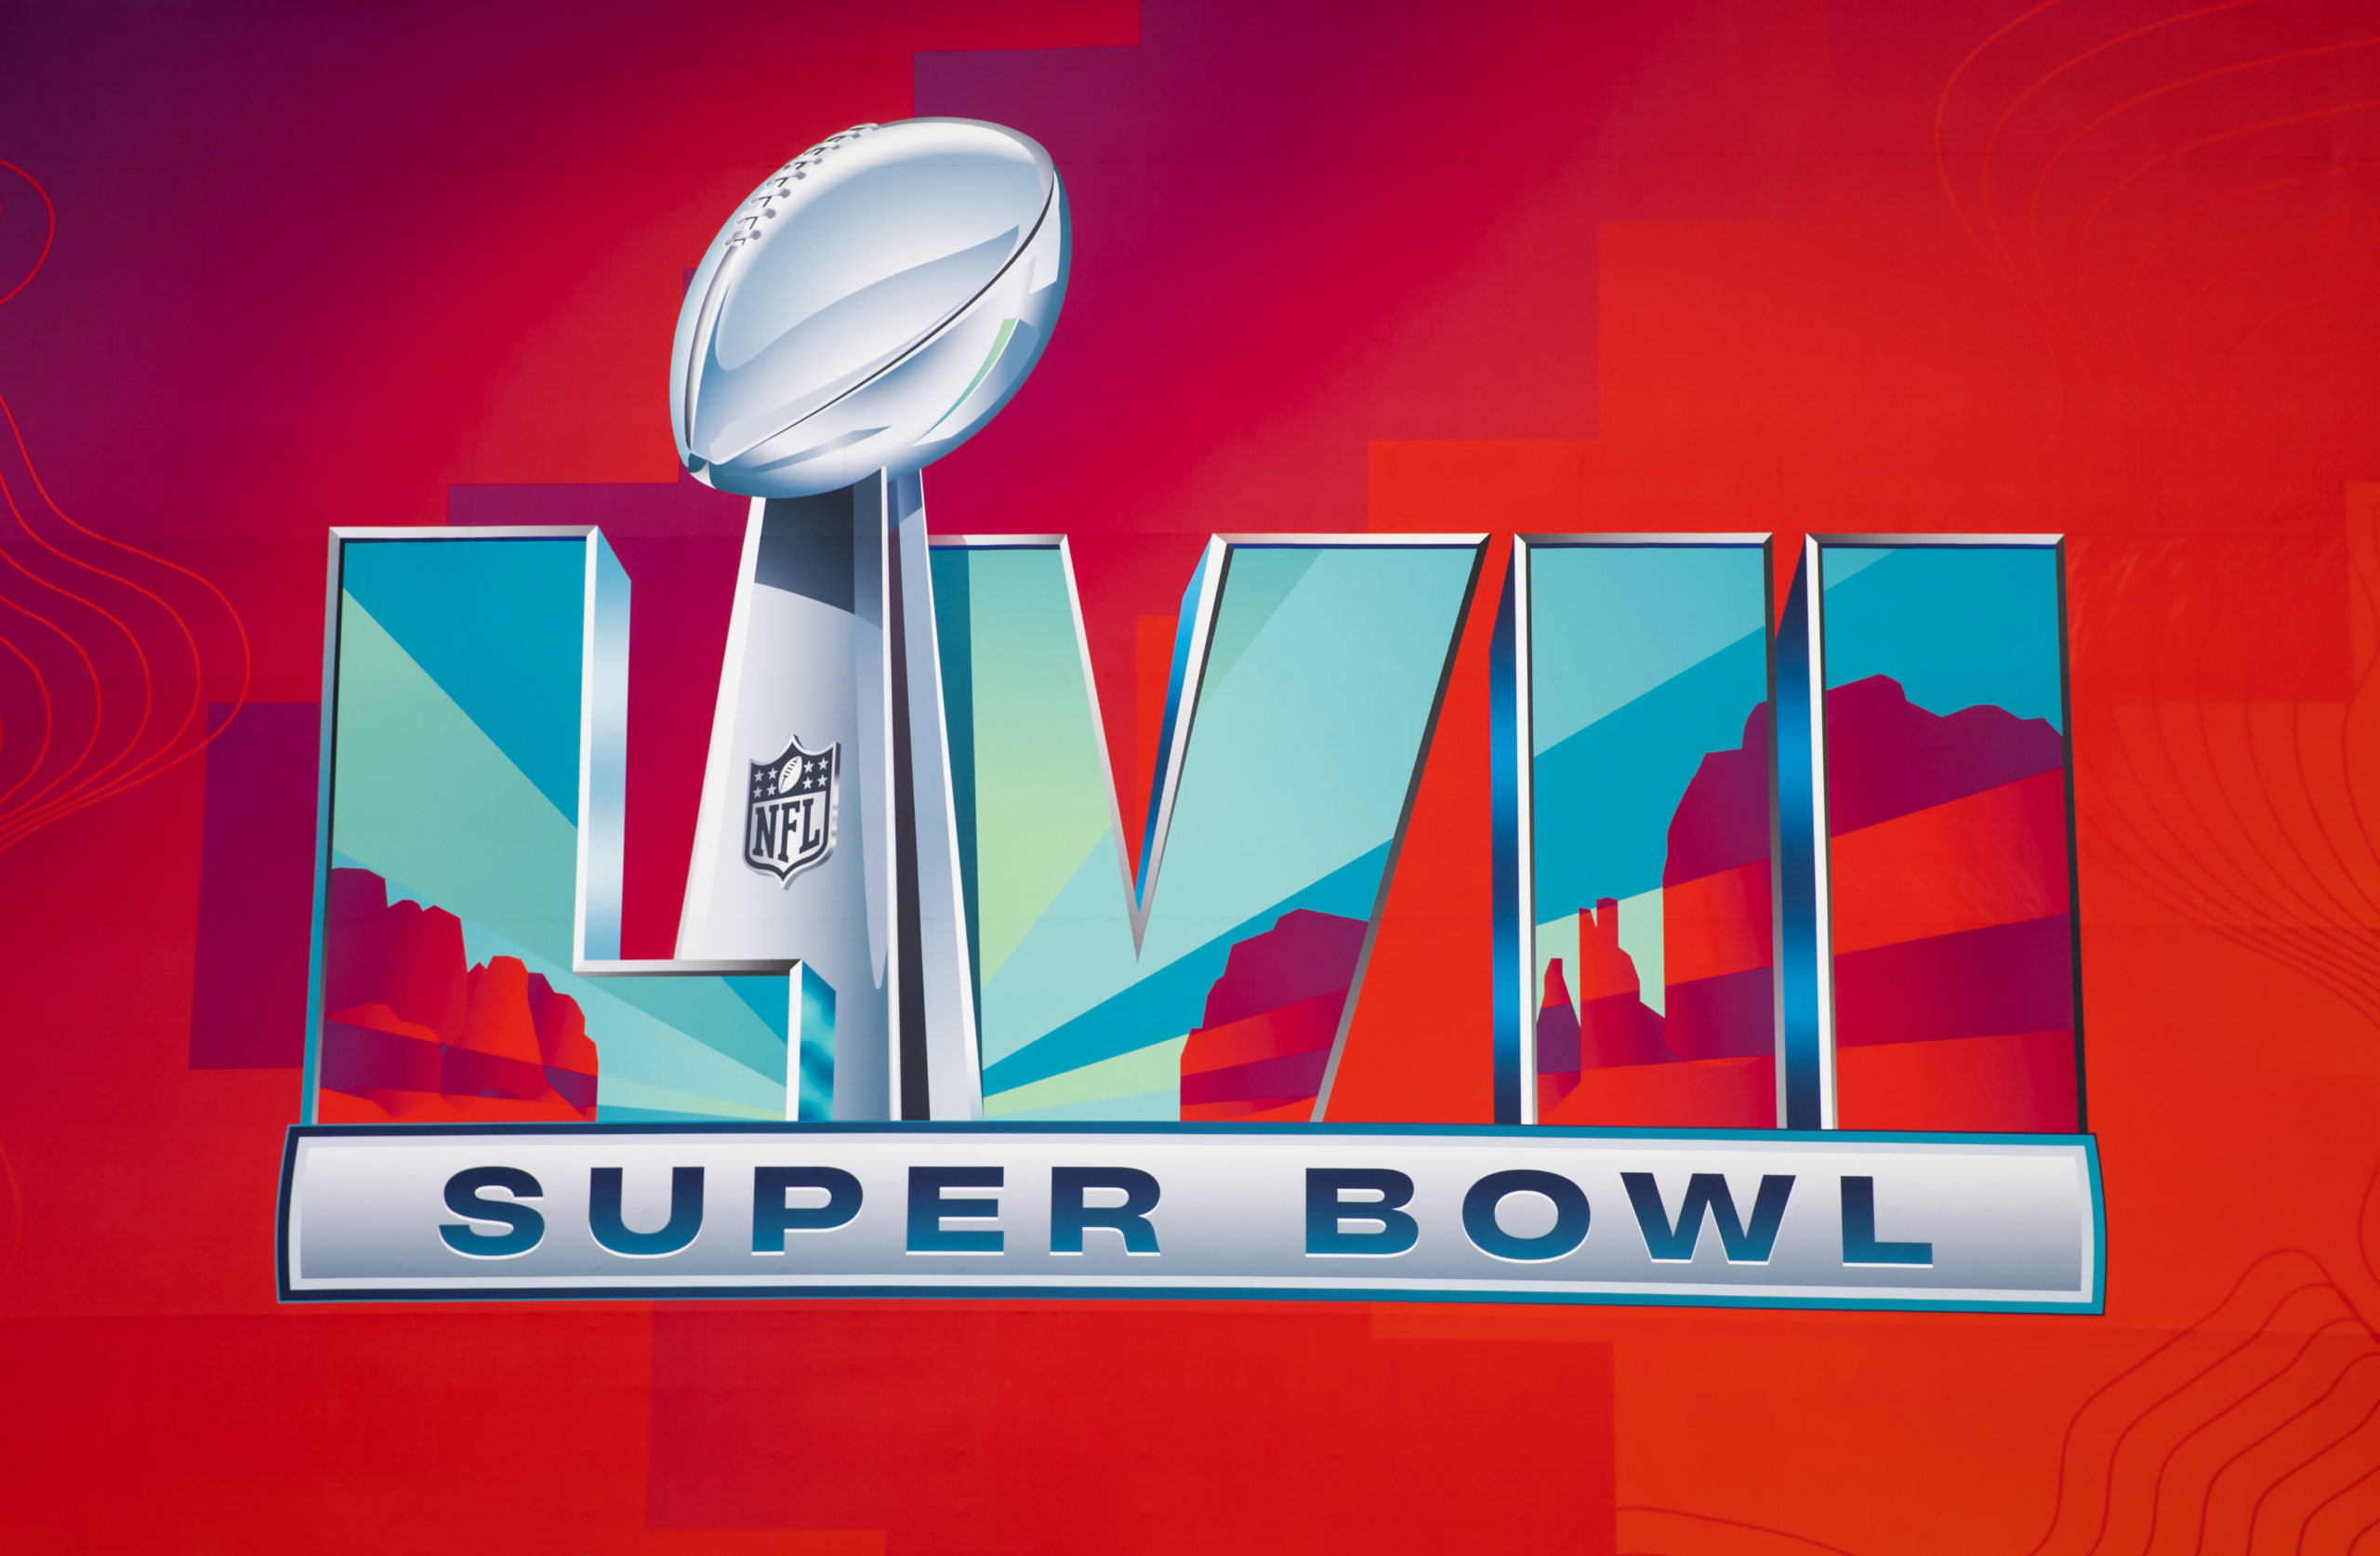 what time is the super bowl on sunday february 13th